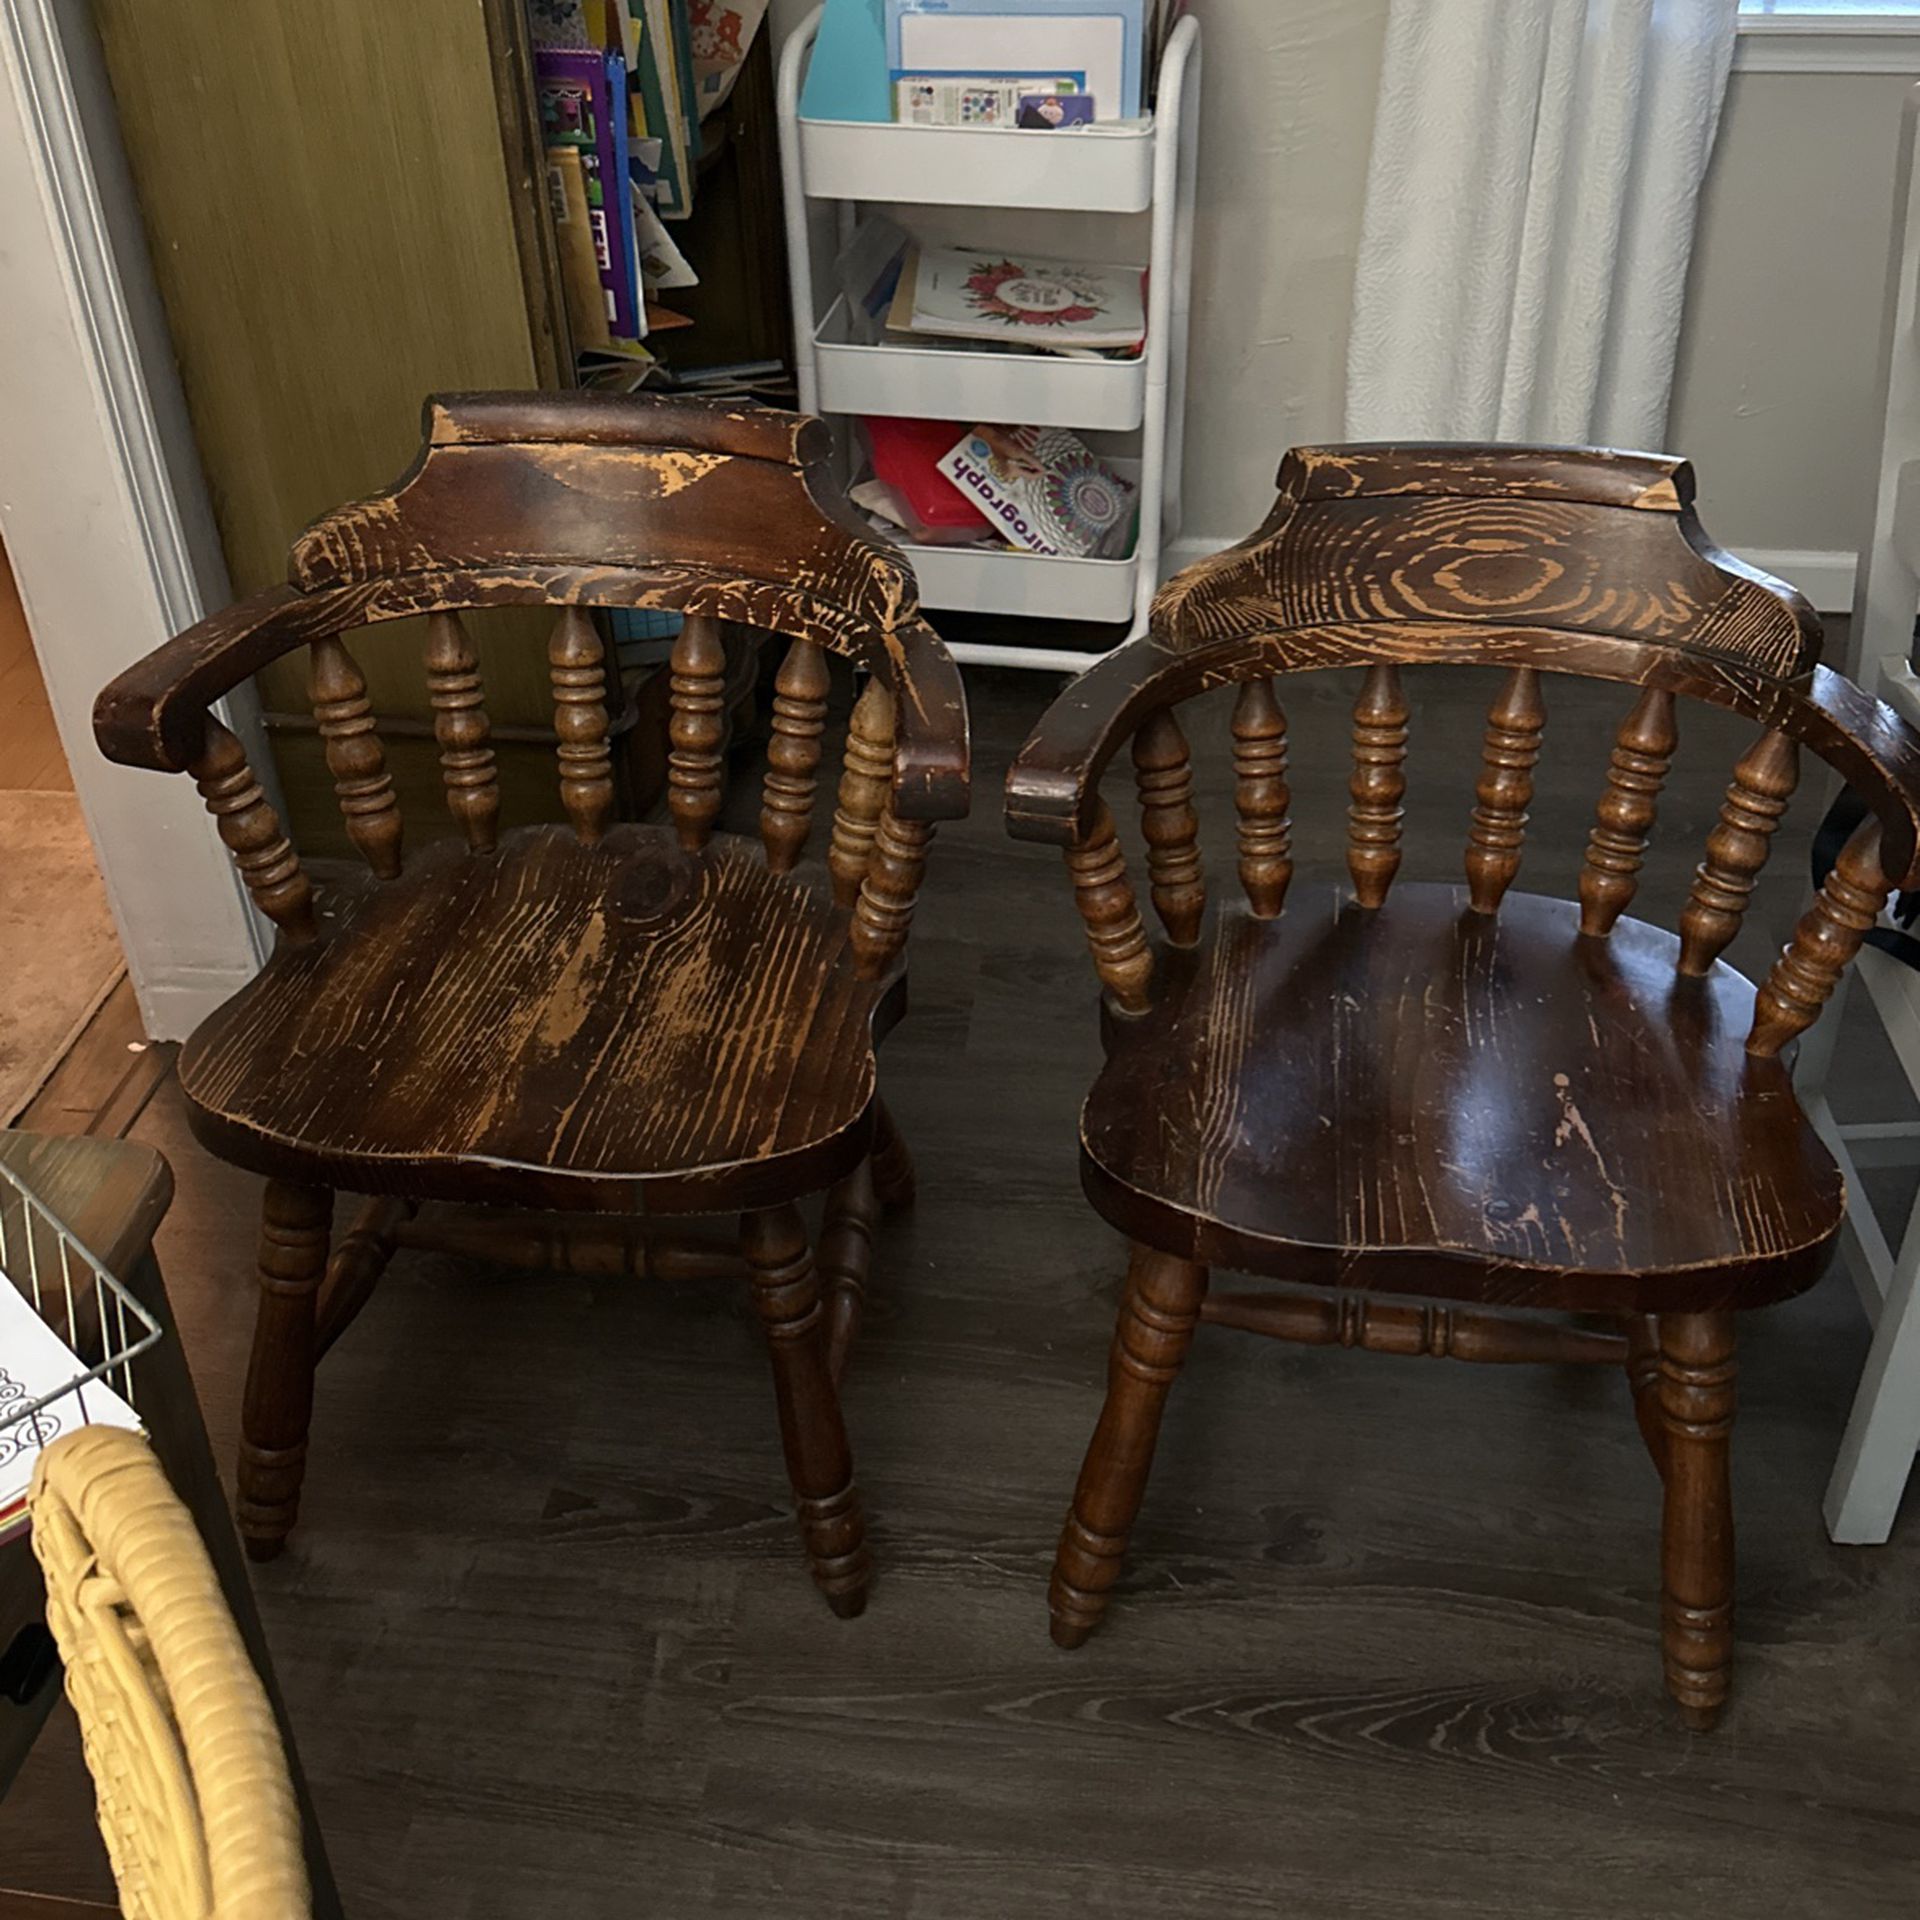 2 Vintage Wooden Chairs 